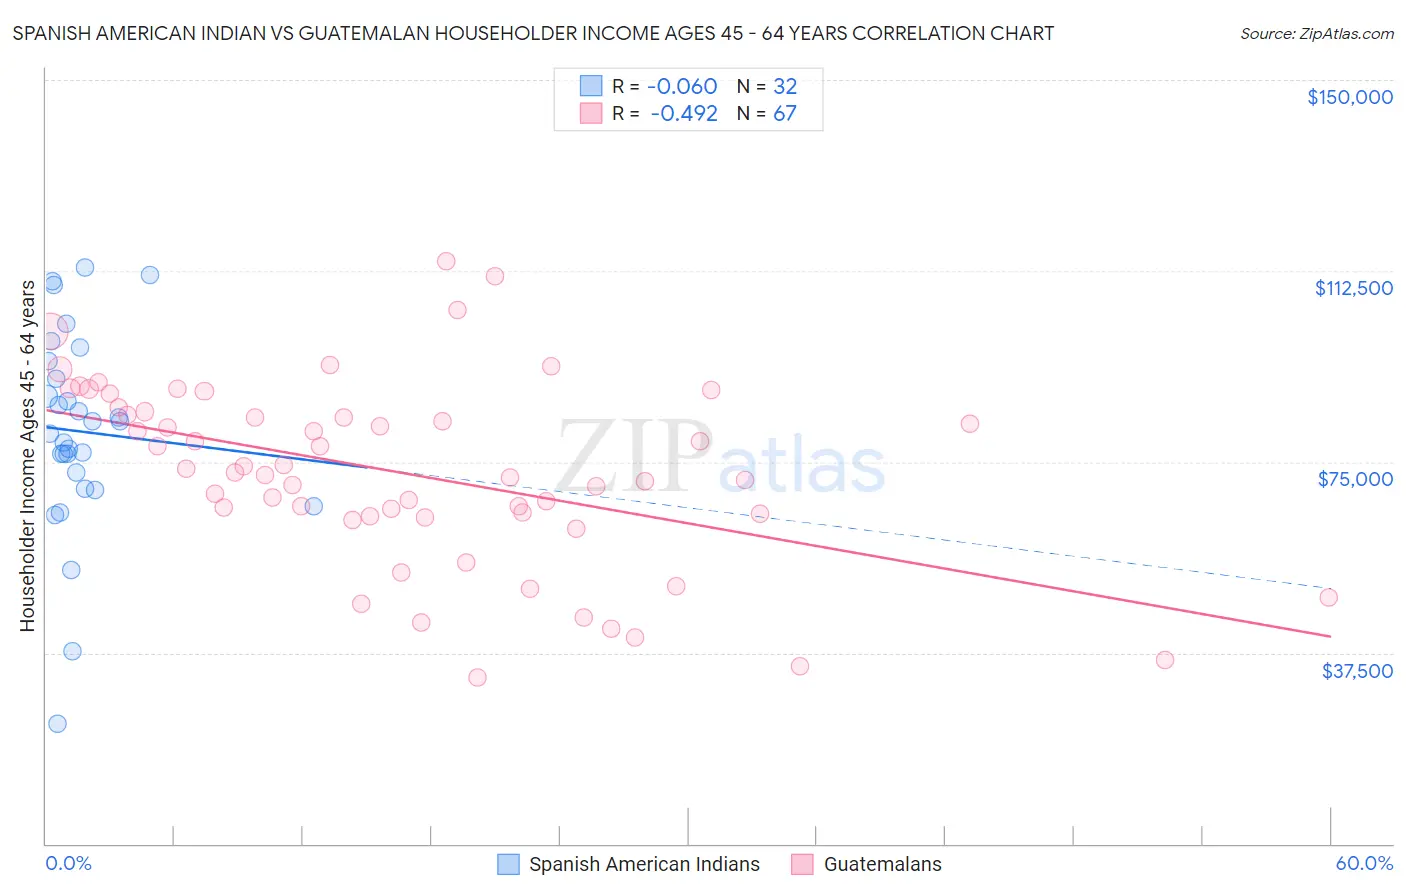 Spanish American Indian vs Guatemalan Householder Income Ages 45 - 64 years